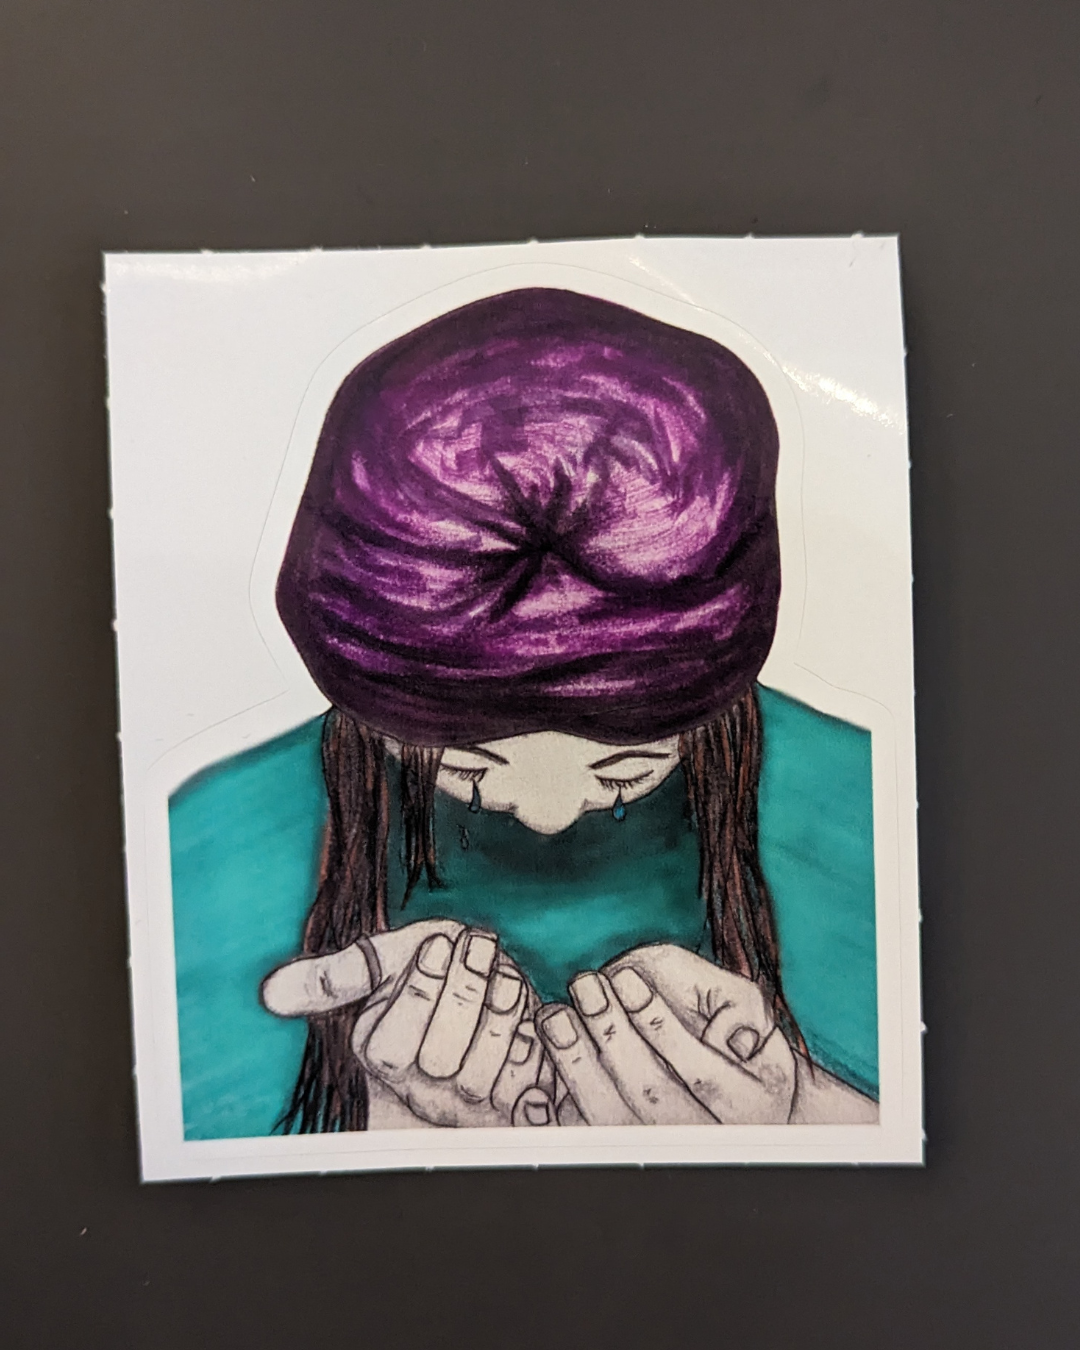 Tears of Relief Crying Girl kiss cut teal and purple vinyl sticker